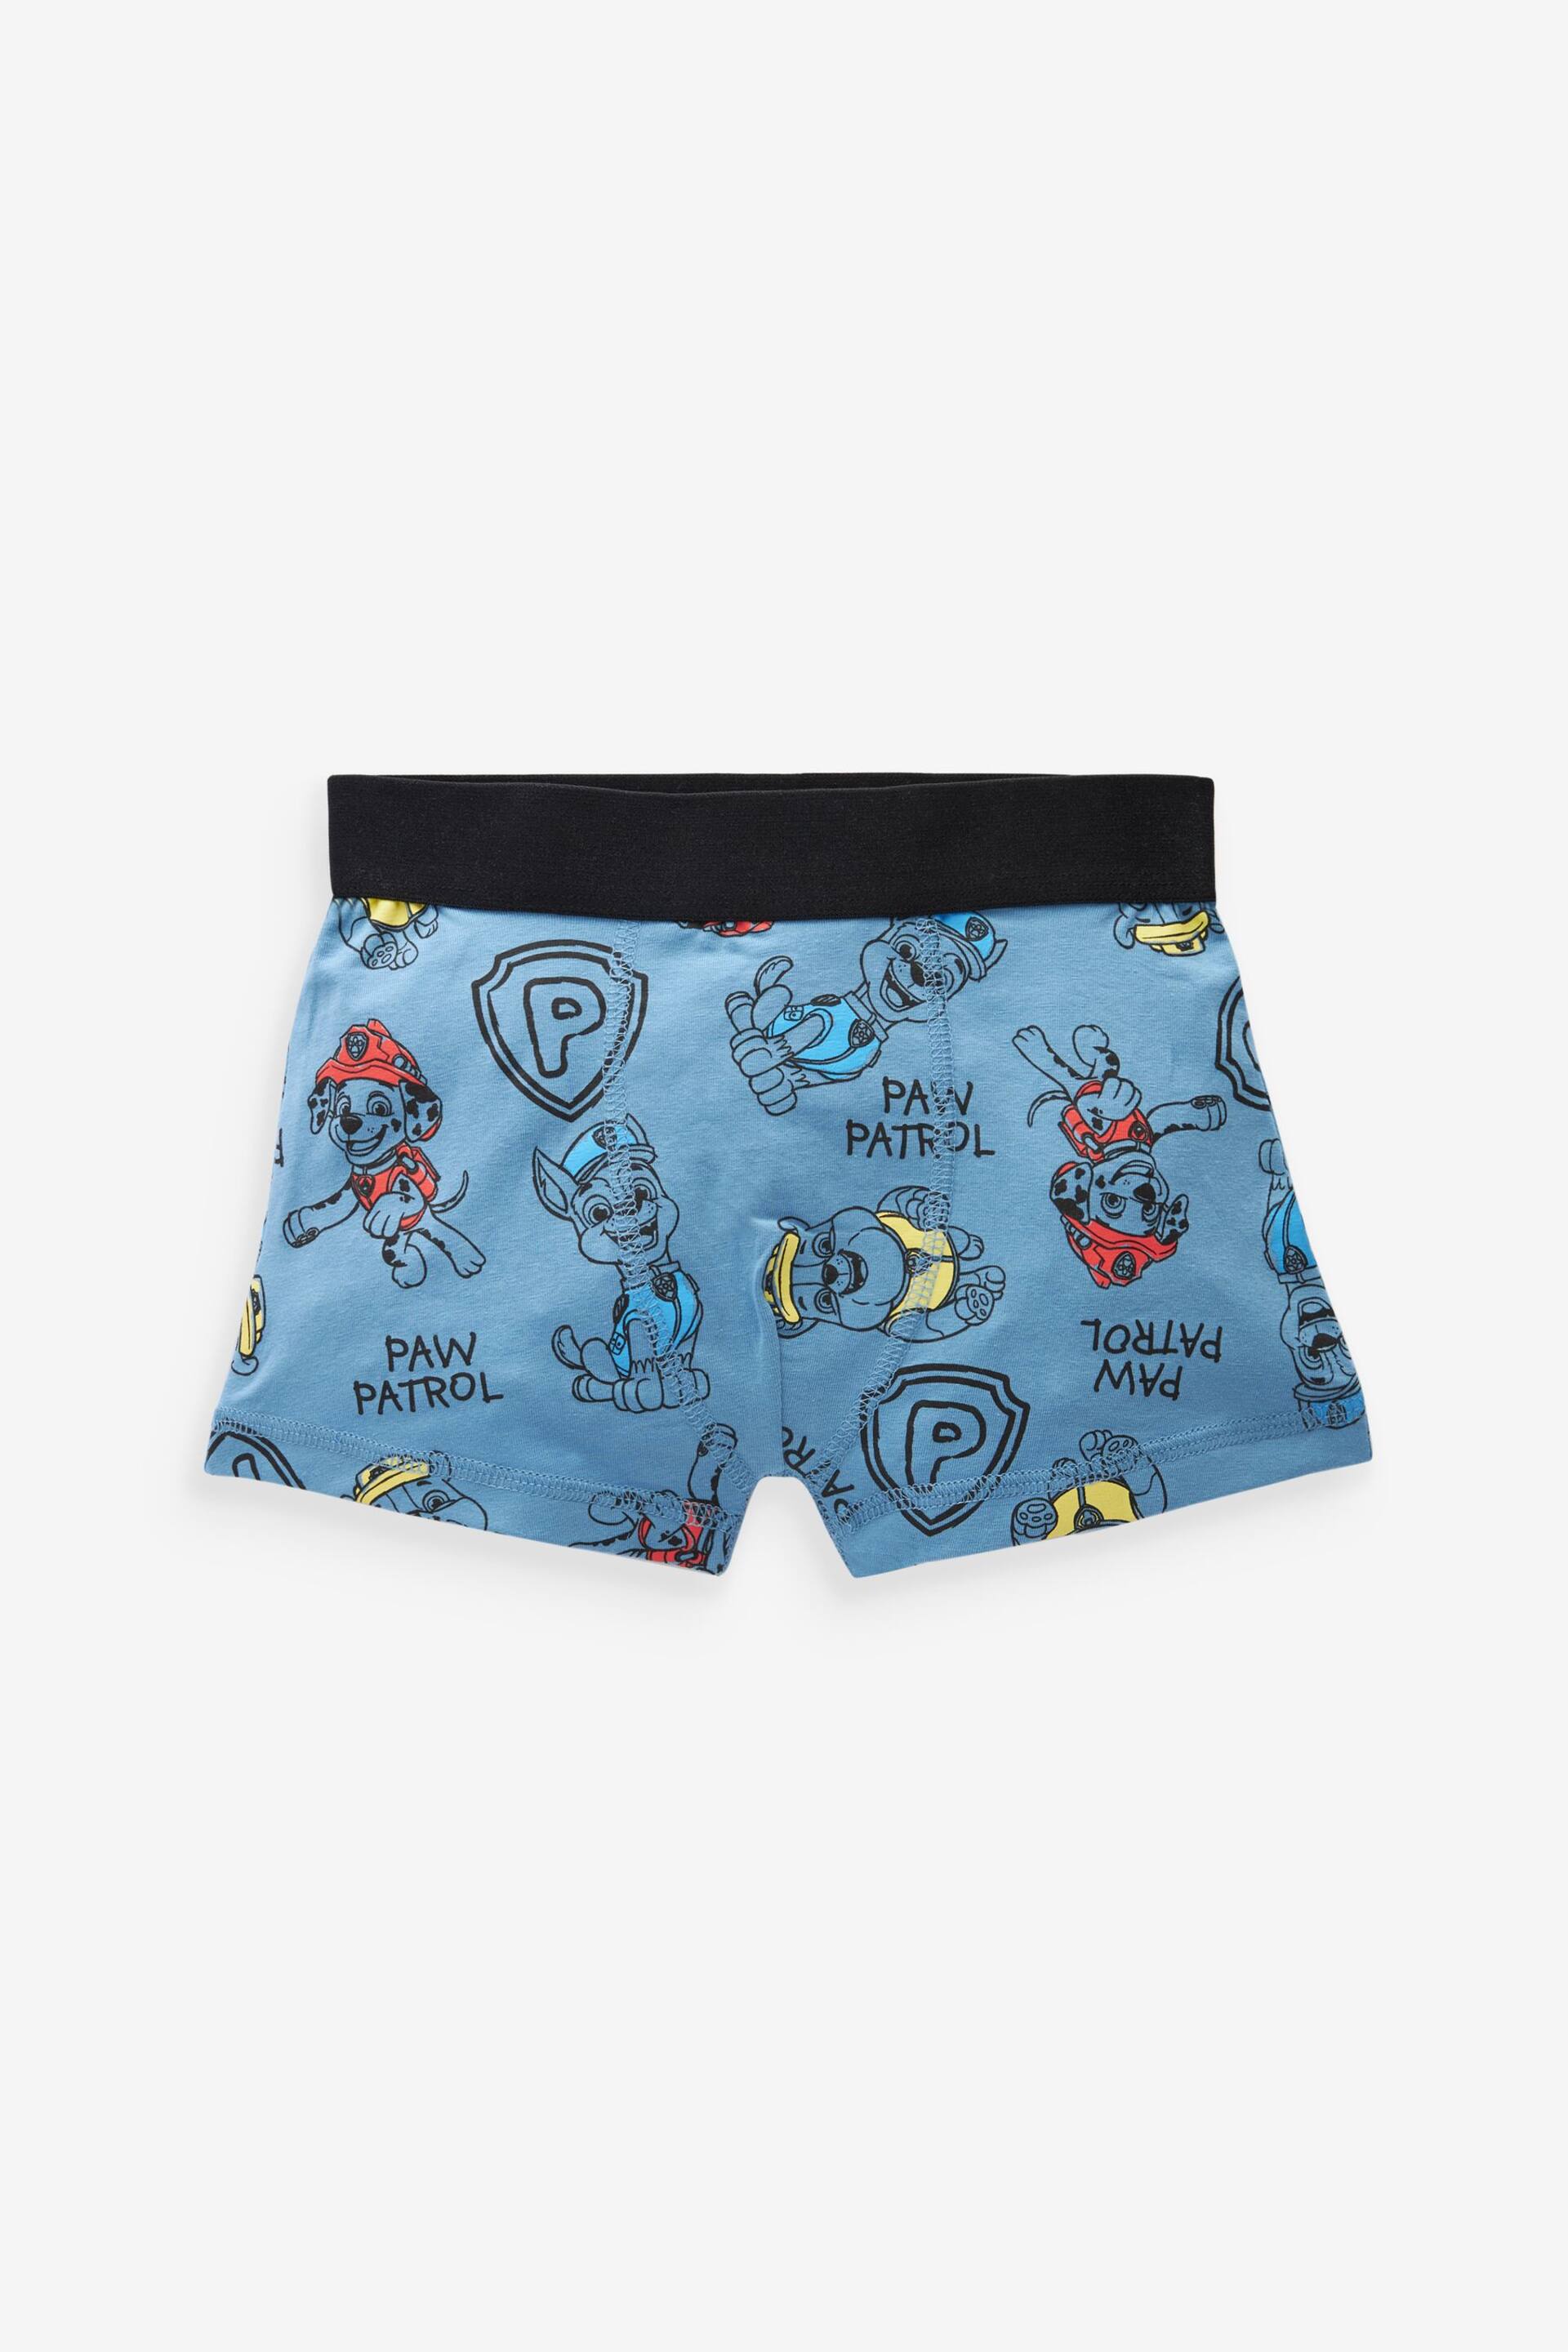 PAW Patrol License Trunks 3 Pack (1.5-14yrs) - Image 3 of 7